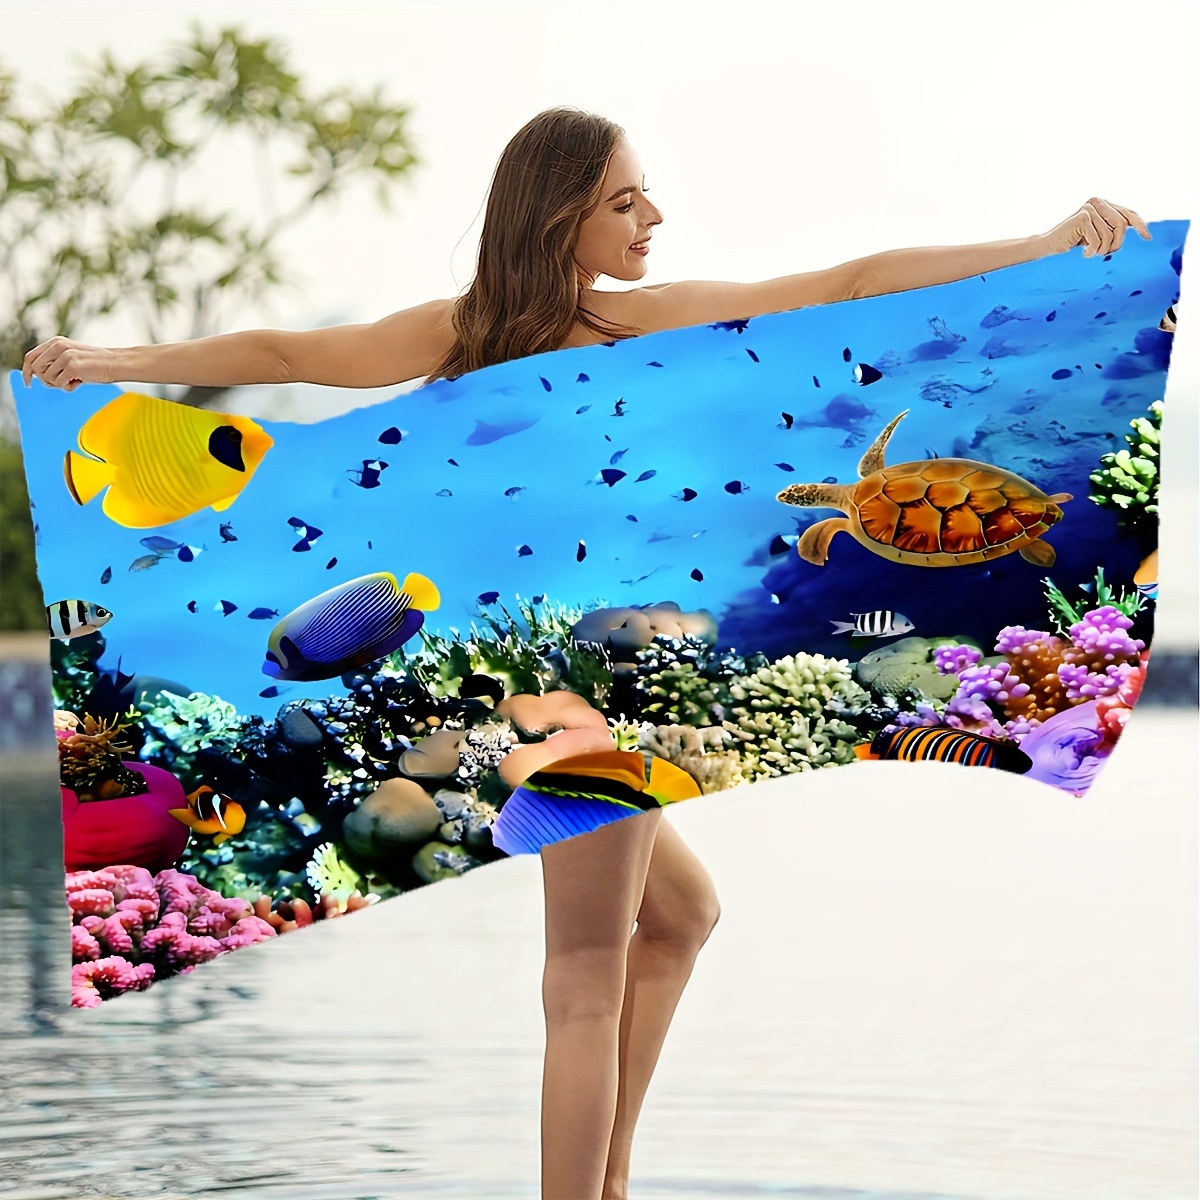 

1pc Fish Pattern Beach Towel, Super Absorbent Beach Towel, Large Microfiber Beach Blanket, For Travel Camping Summer Vacation, Beach Essentials, Holiday Essential Gift